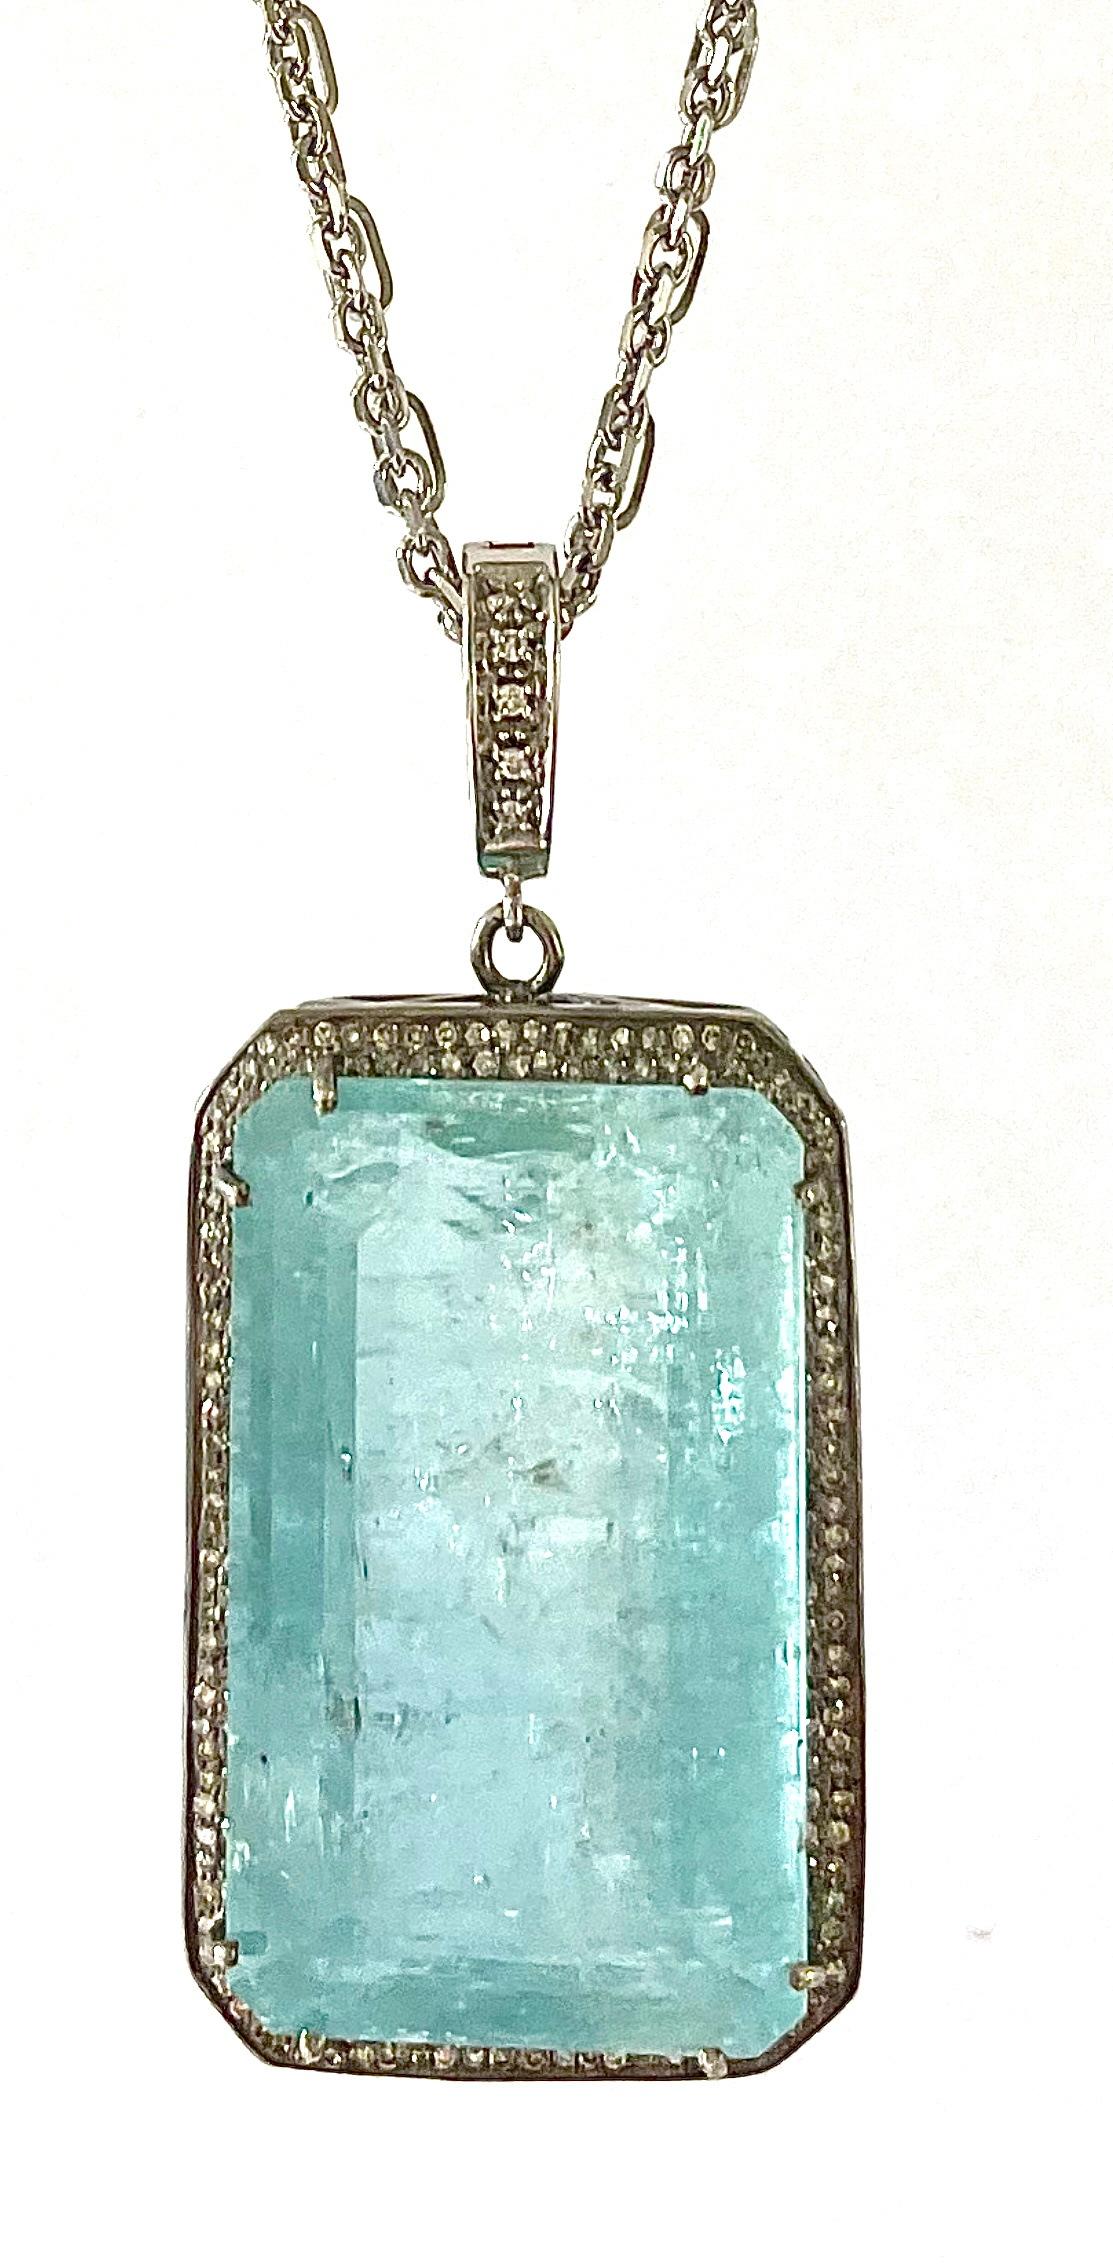 Description
Stunning and unique, large 76 carat Aquamarine pendant with natural character inclusions and pave diamonds. 
Pendant suspends from a double 14k white gold chain necklace. Pendant is removable, but not sold separately.
Item #